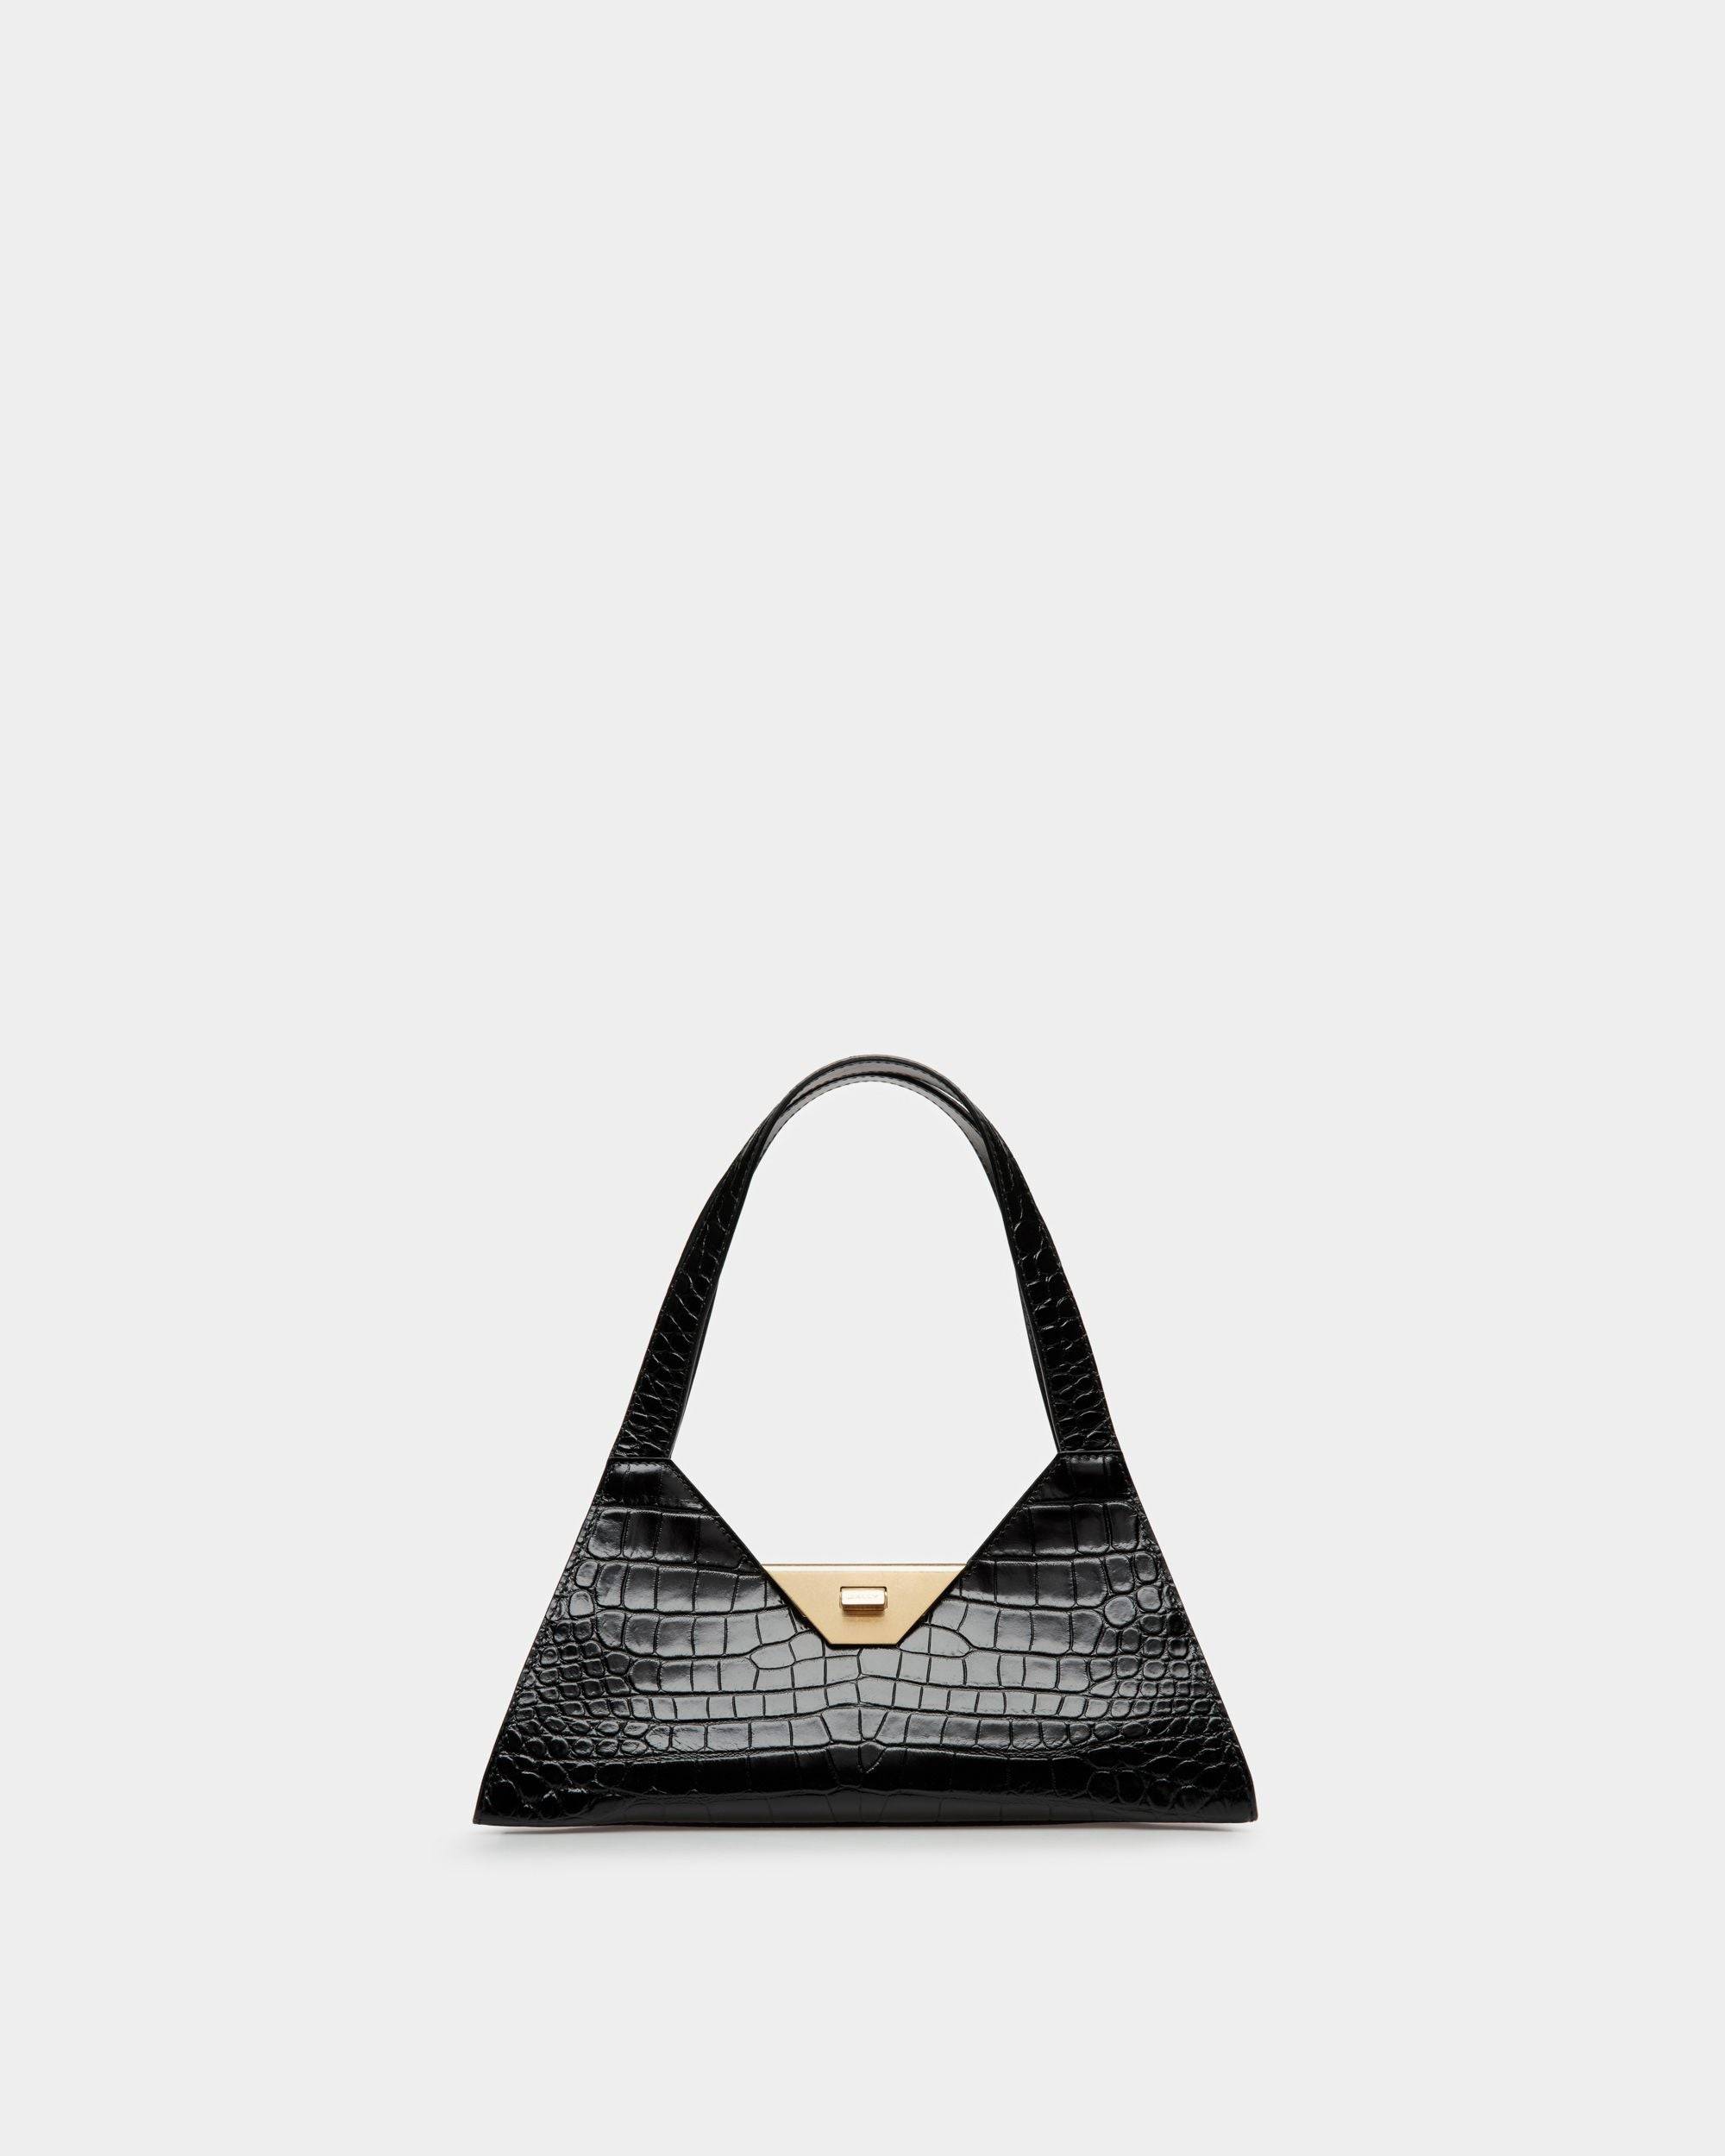 Women's Trilliant Small Shoulder Bag In Black Leather | Bally | Still Life Front